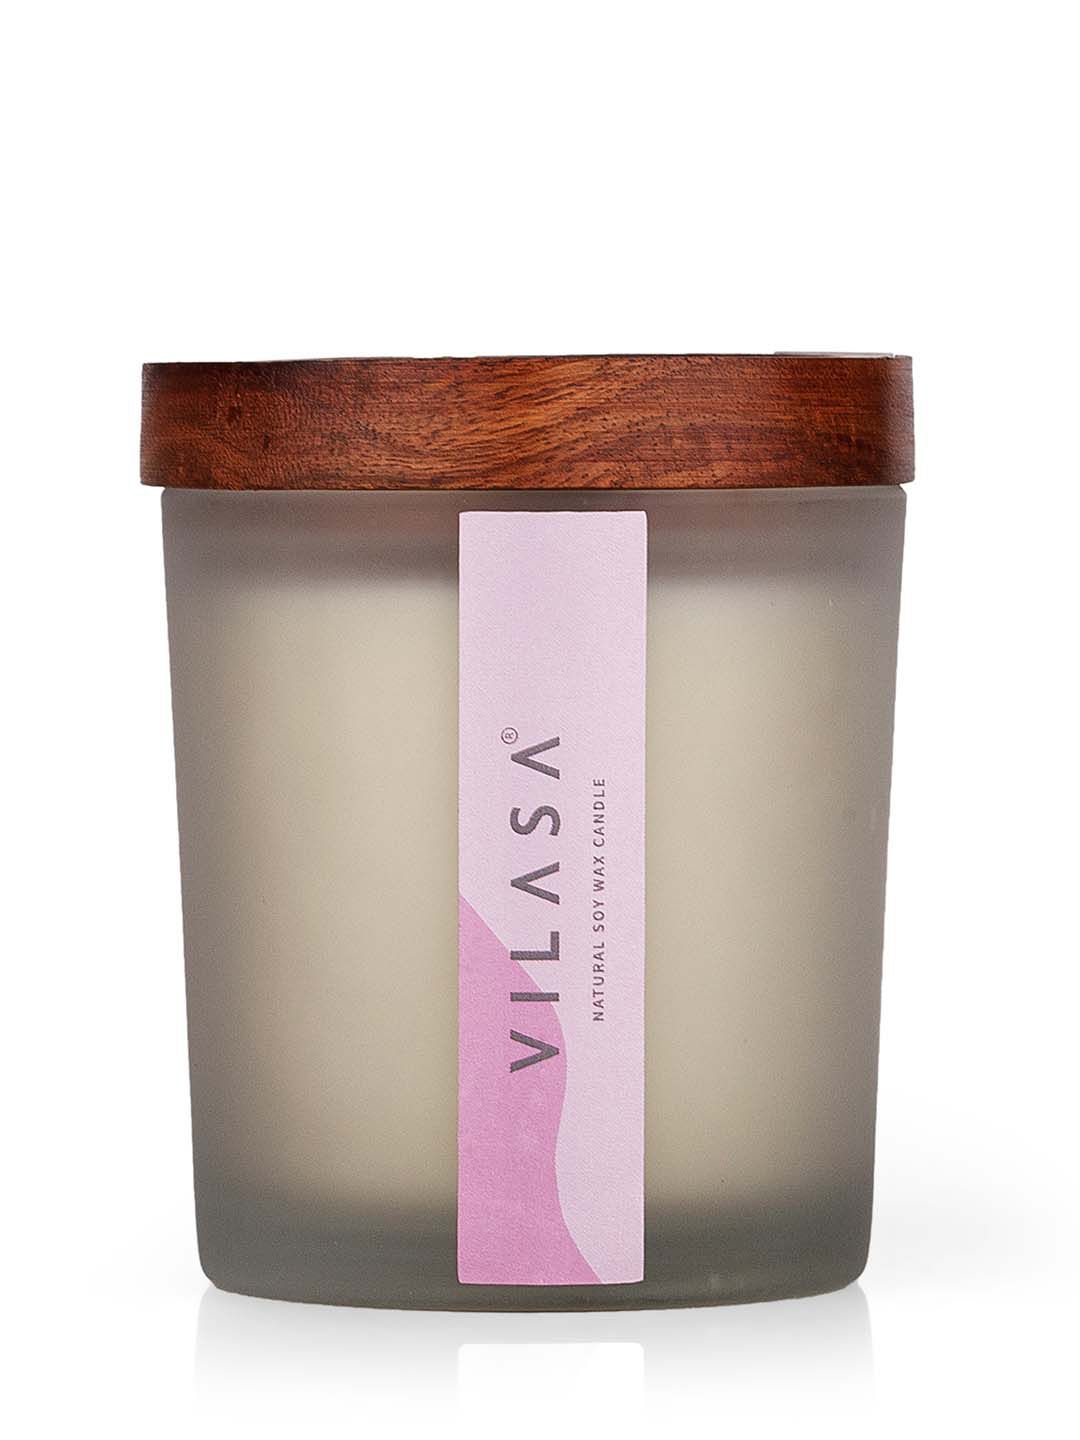 VILASA Celebrate Natural Soy Wax Candle with Jasmine & Woody Notes - 150 g Price in India